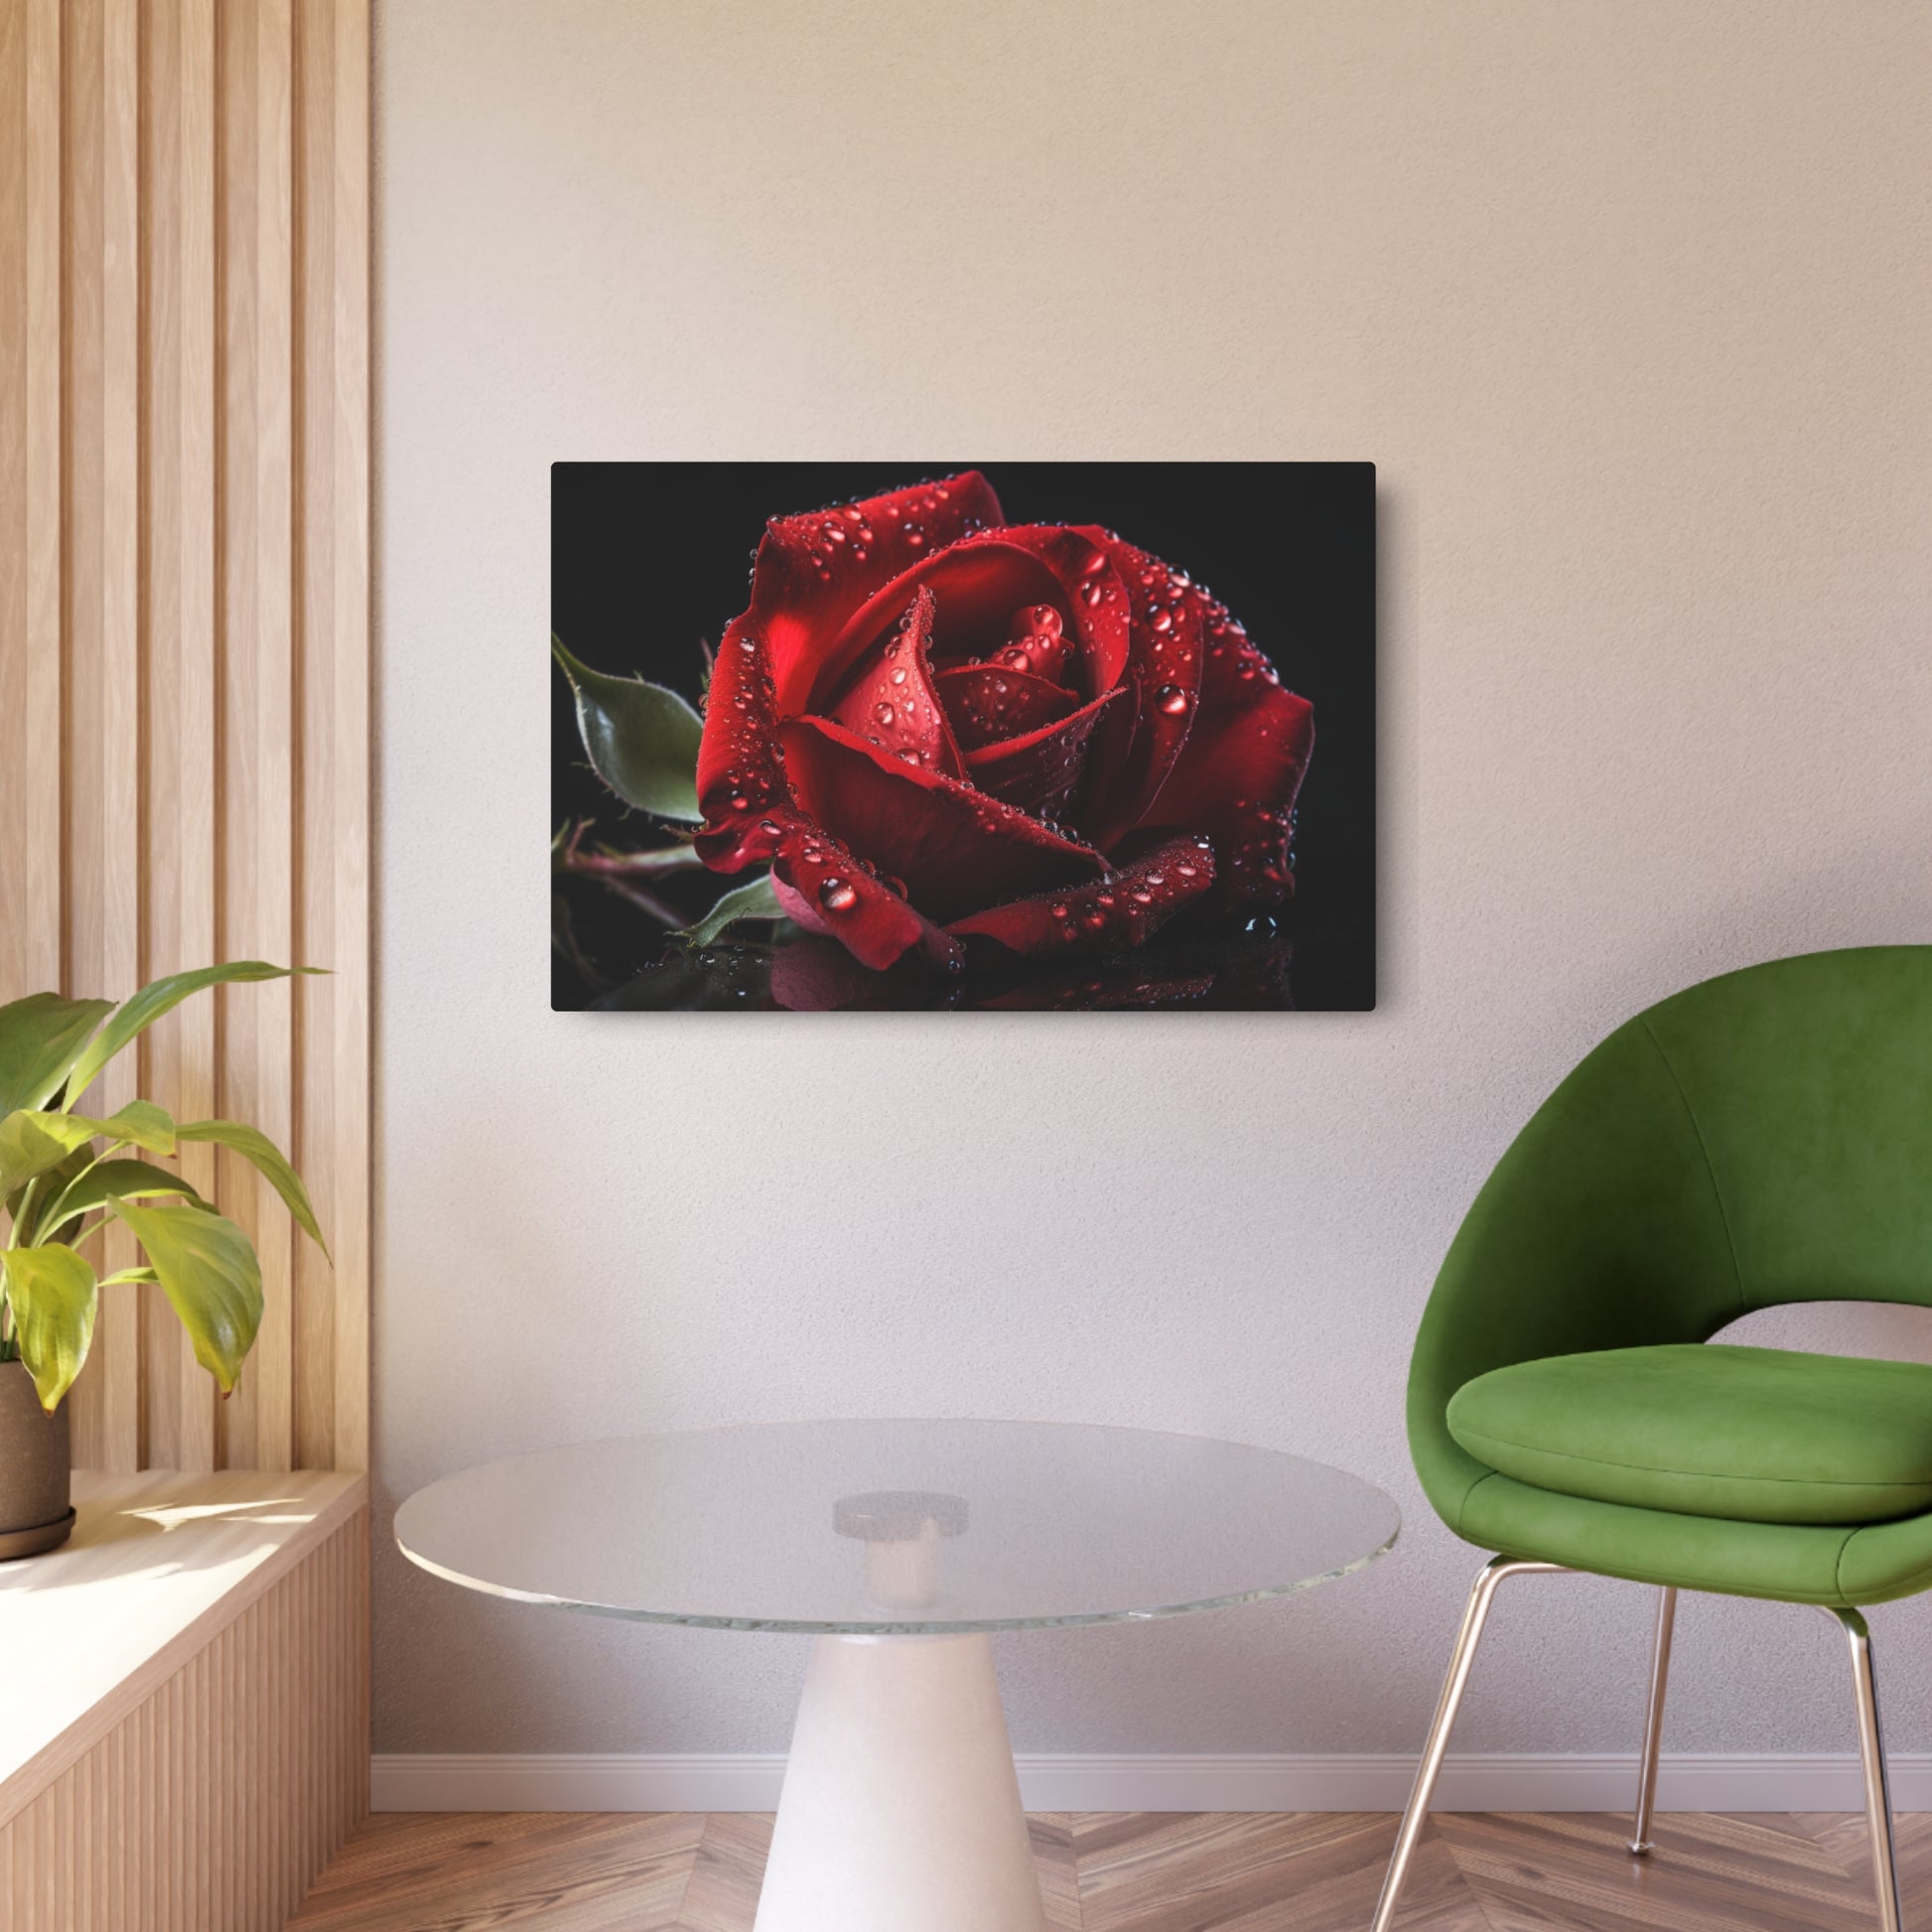 A print of a Red Rose with droplets of water